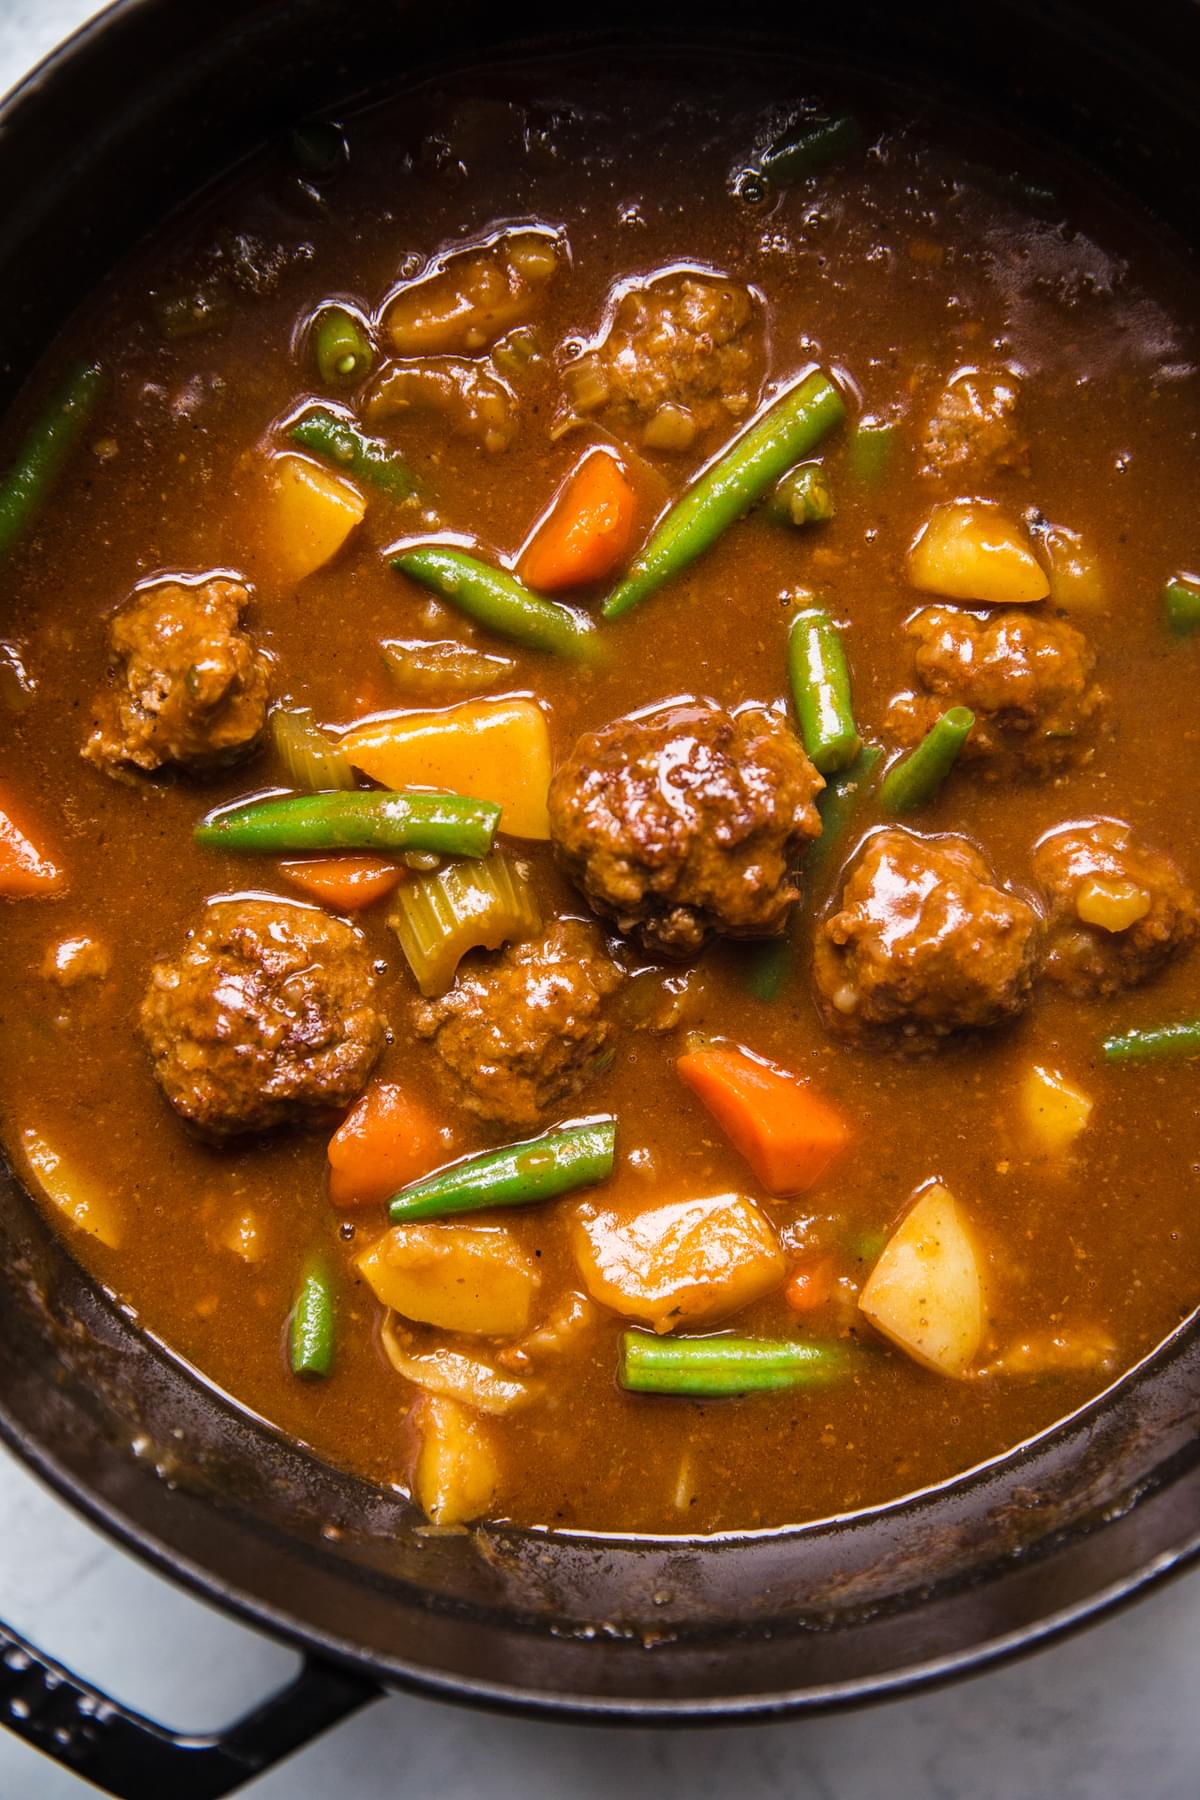 homemade meatball stew with green beans, celery, carrots, onion, potatoes and ground beef in a pot on the counter